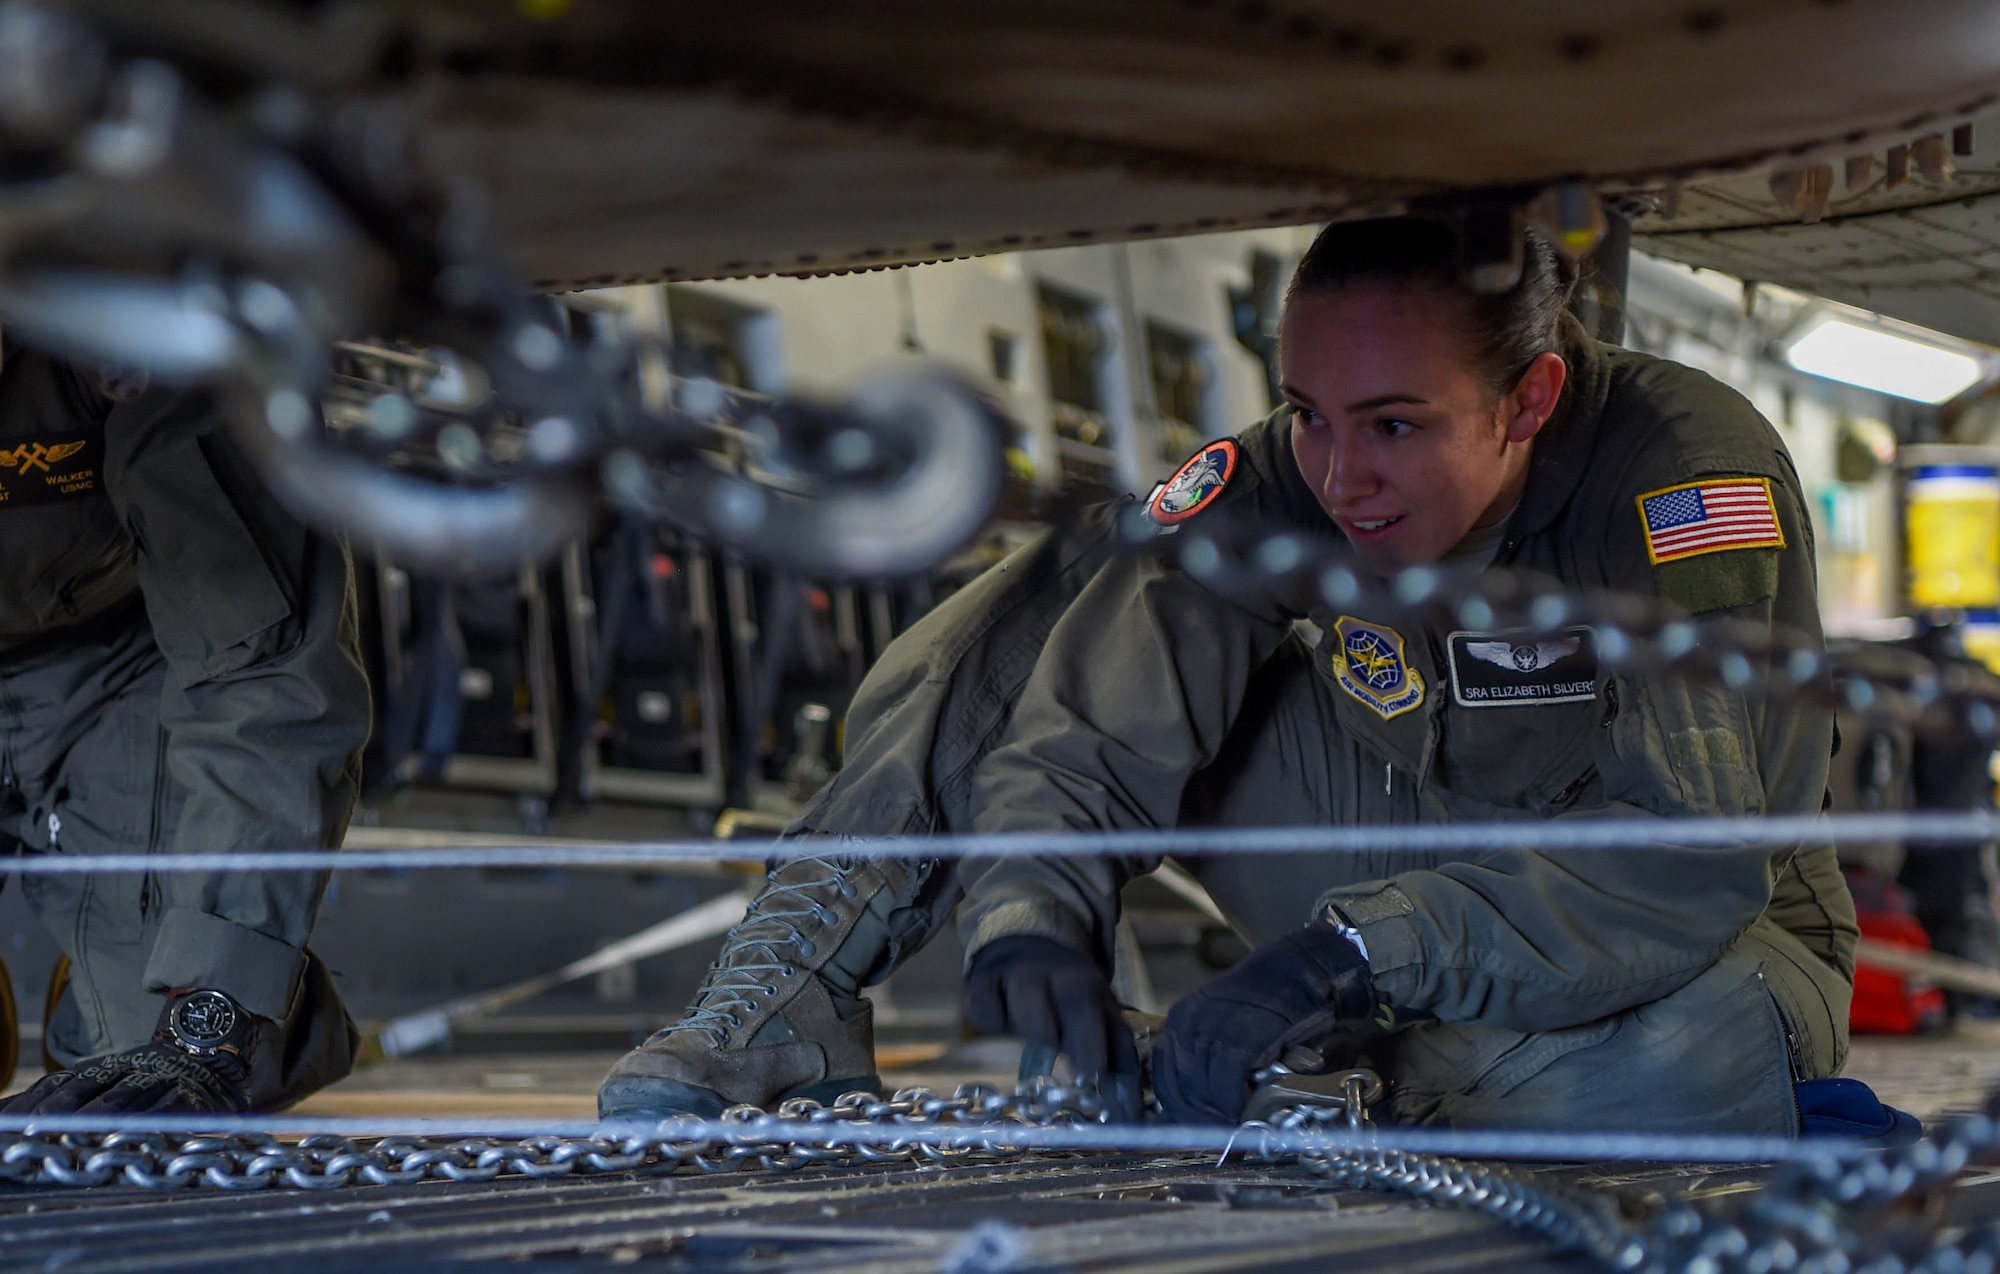 U.S. Air Force Senior Airman Elizabeth Silvers, 4th Airlift Squadron loadmaster, chains a U.S. Marine Corps UH-1Y Venom to a C-17 Globemaster III at Václav Havel Airport Prague, Czech Republic, Sept. 10, 2018. The helicopter had to be held down with safety chains in case it slipped during the offload. (U.S. Air Force photo by Senior Airman Tryphena Mayhugh)